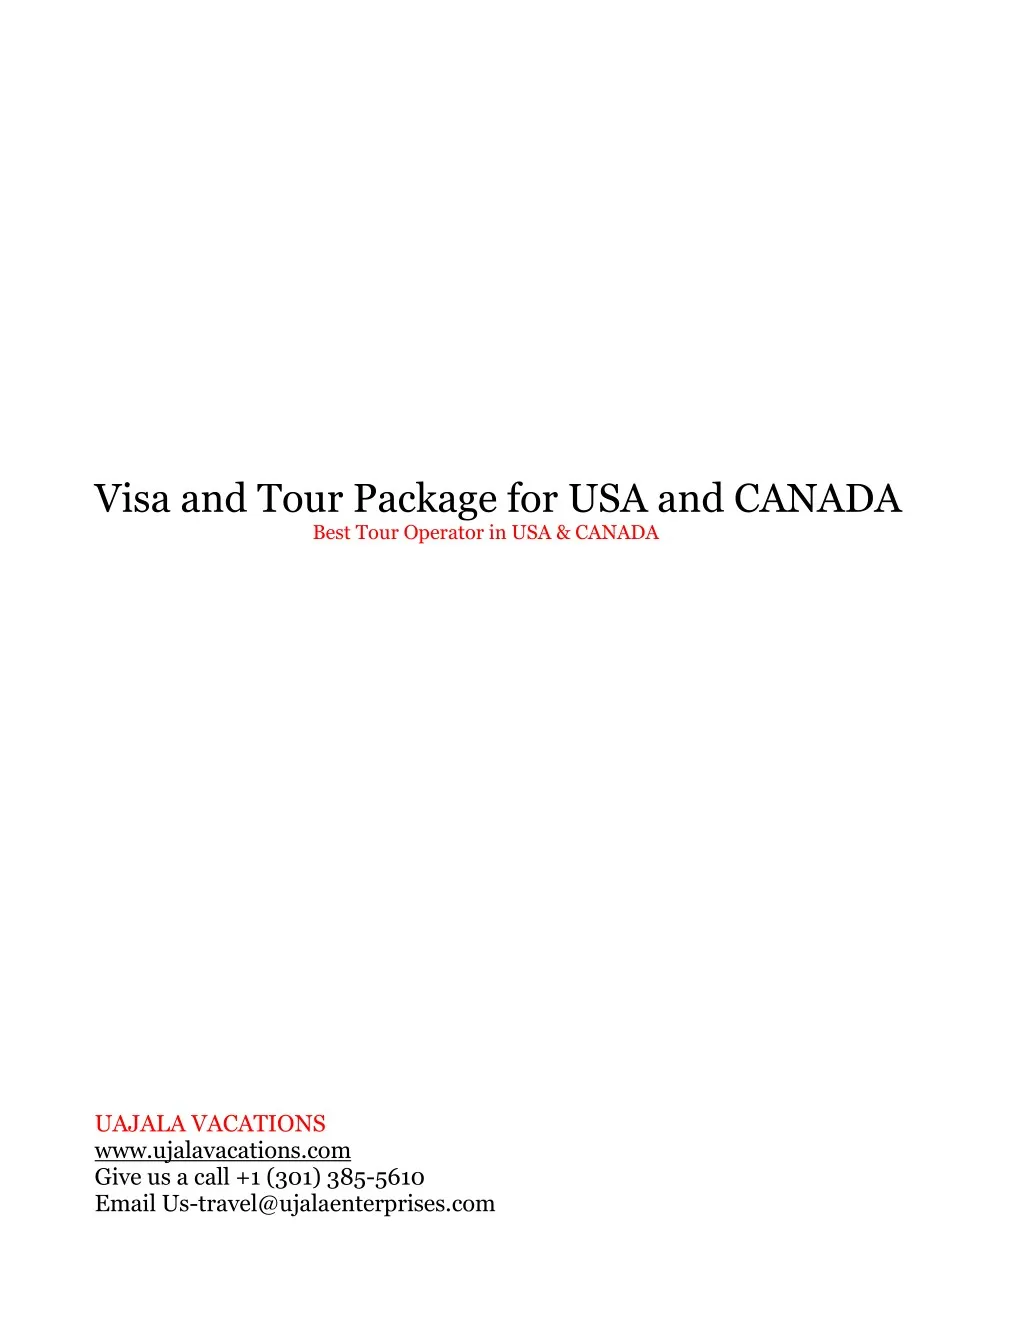 visa and tour package for usa and canada best